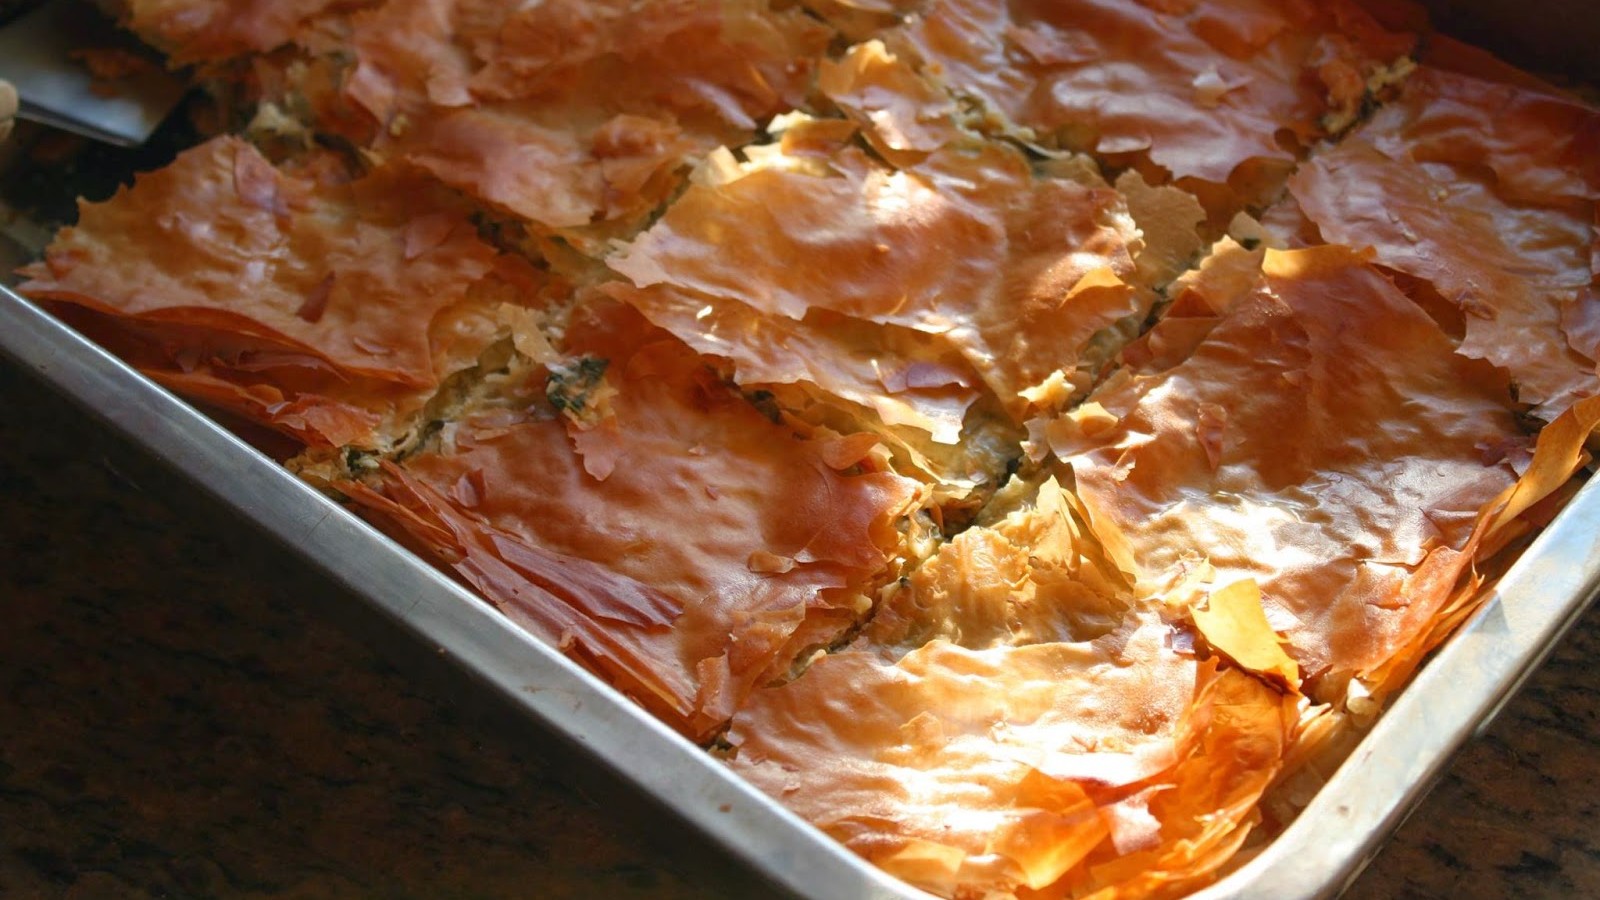 Image of Fall Garden Greens Spanakopita with Garlic Olive Oil